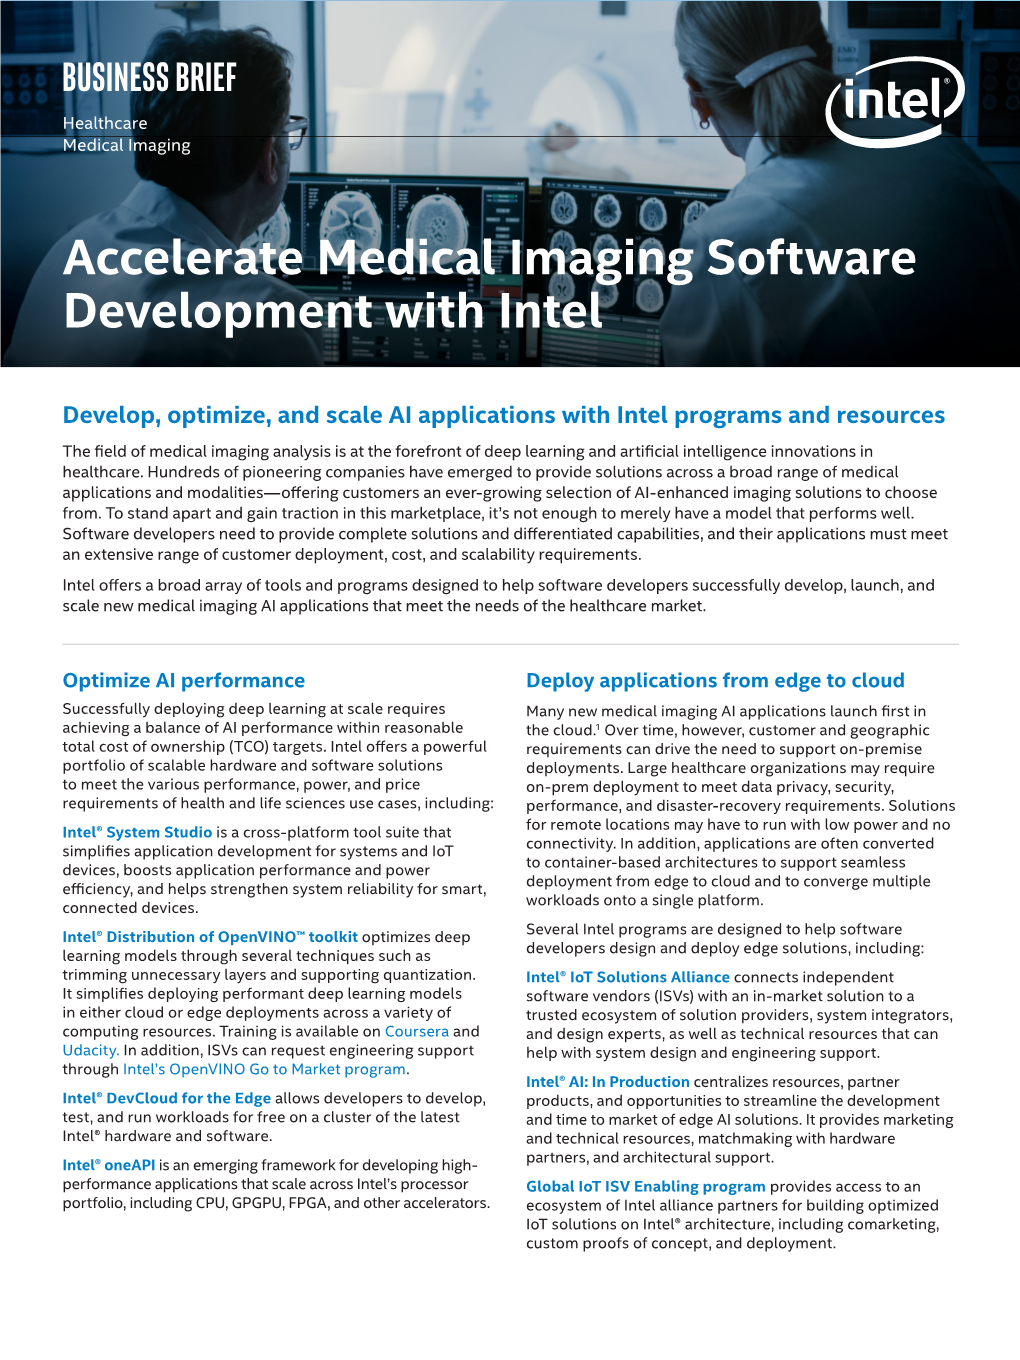 Accelerate Medical Imaging Software Development with Intel